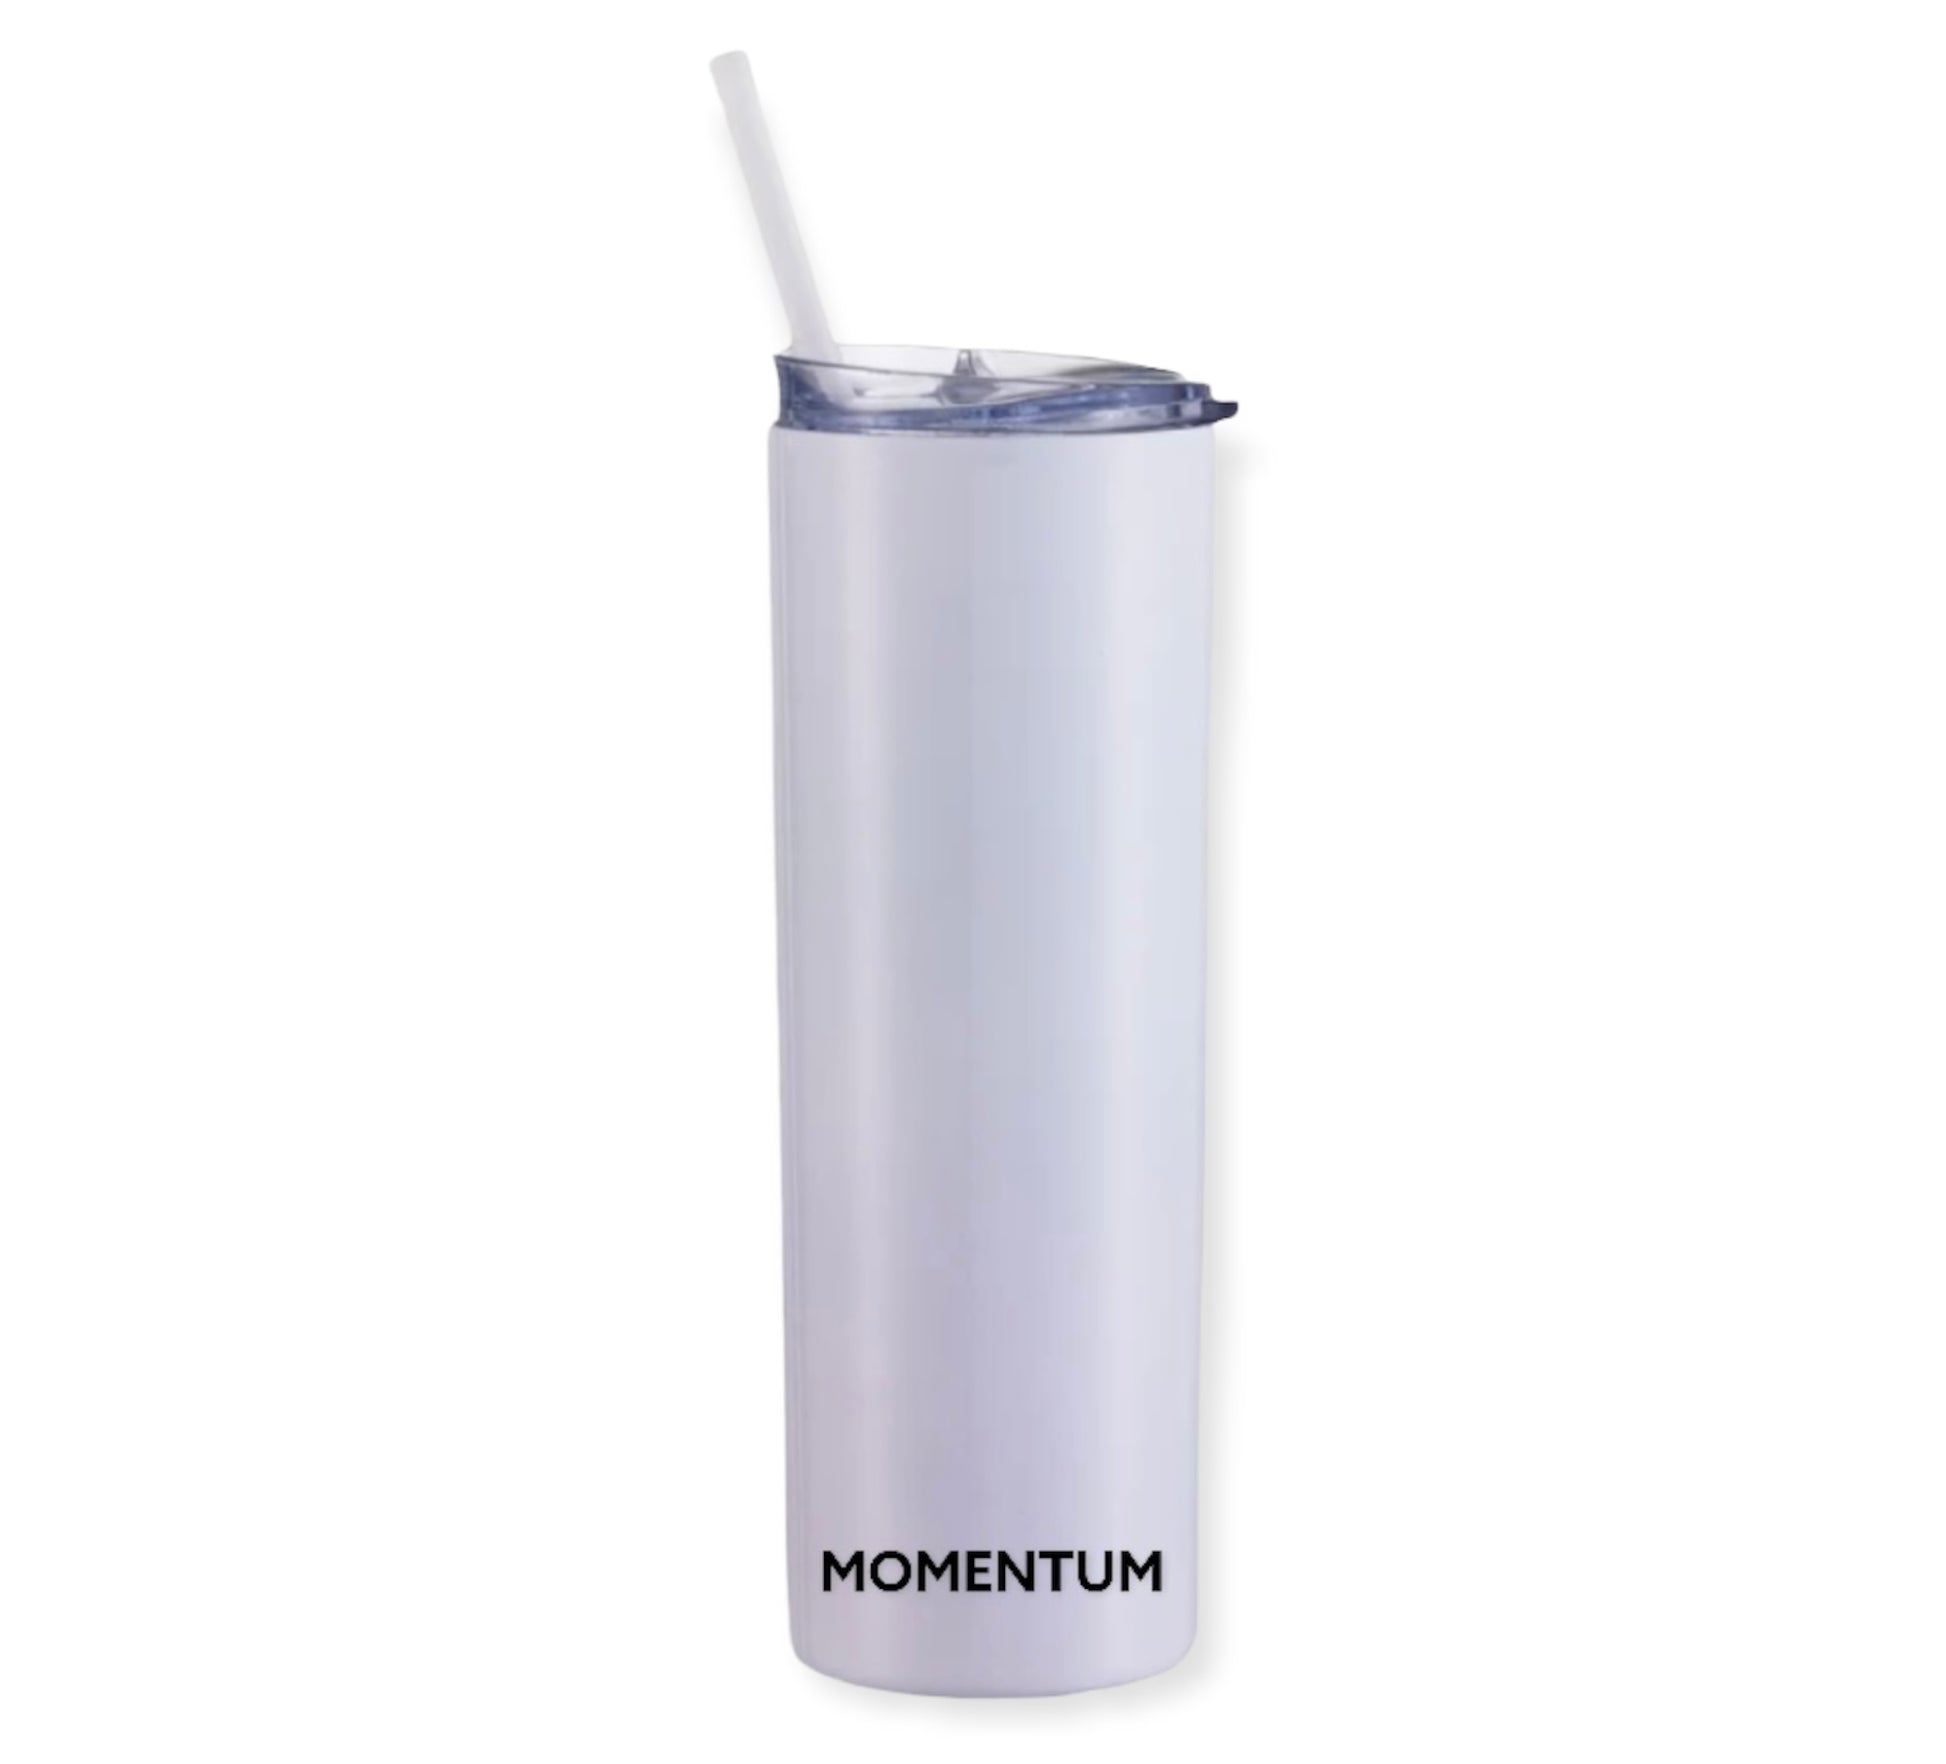 But First Dance. 20oz stainless steel thermo with slide top lid and plastic reusable straw.